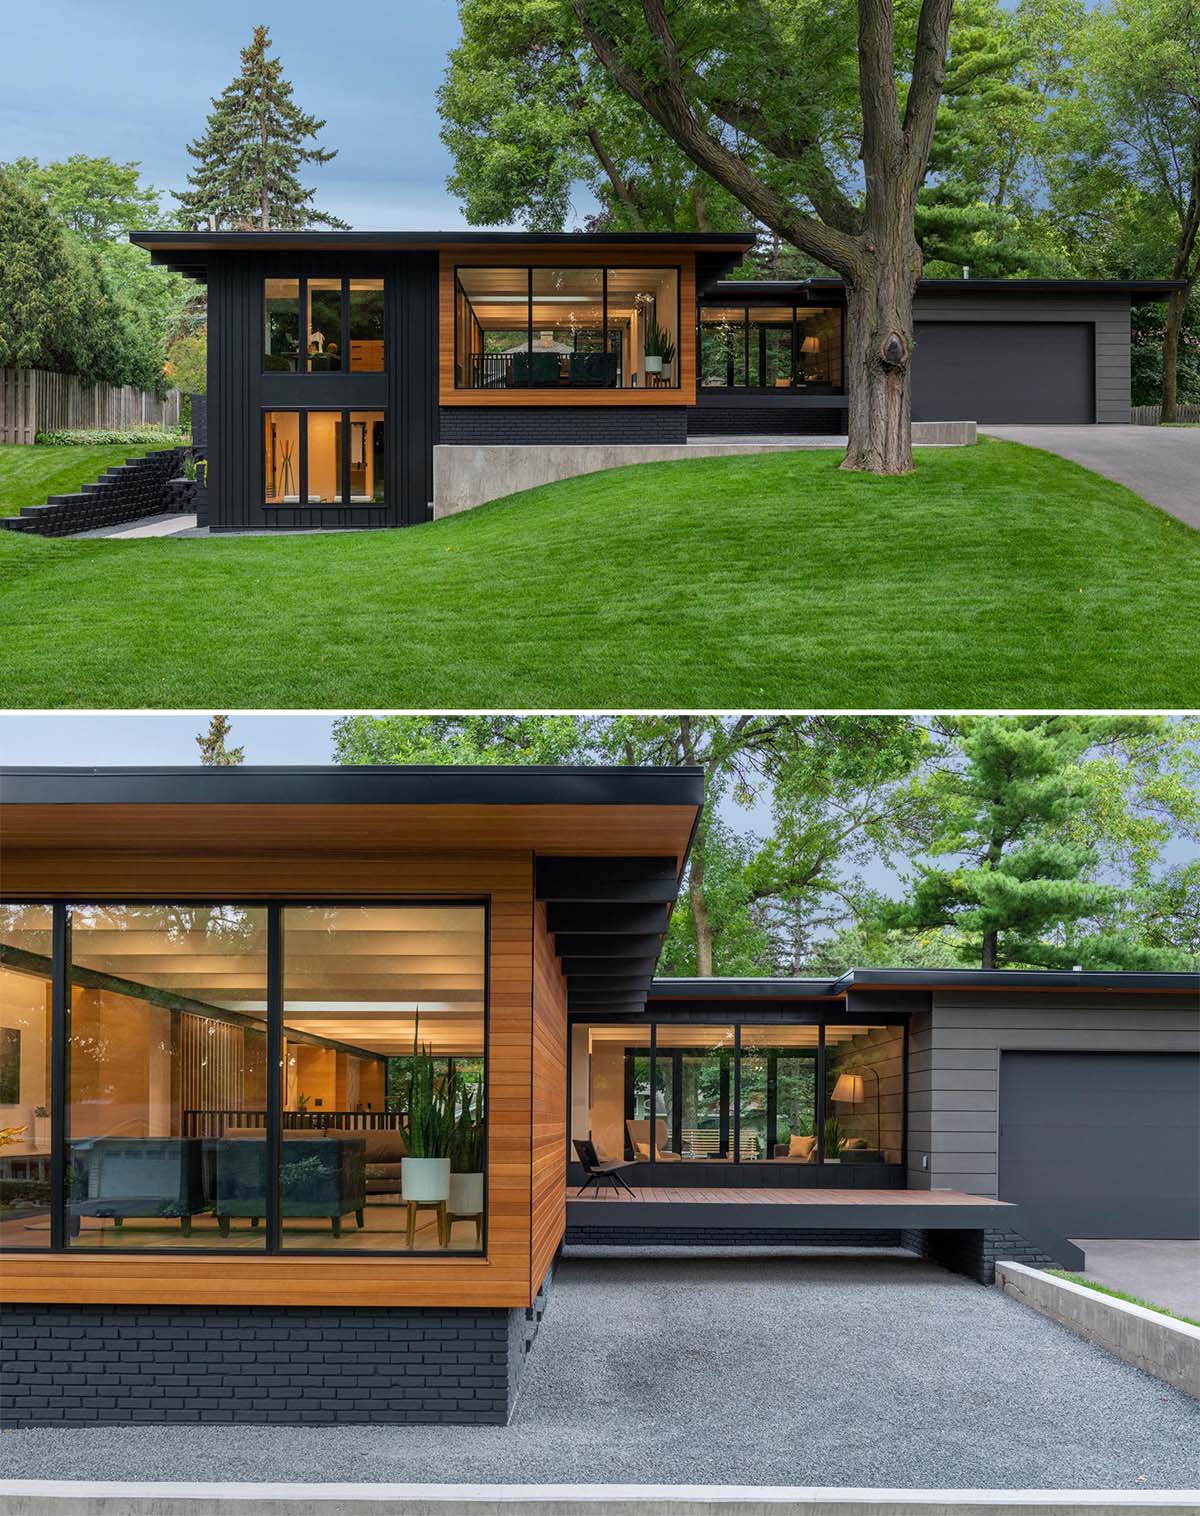 A remodeled mid century modern house with a black and wood exterior.